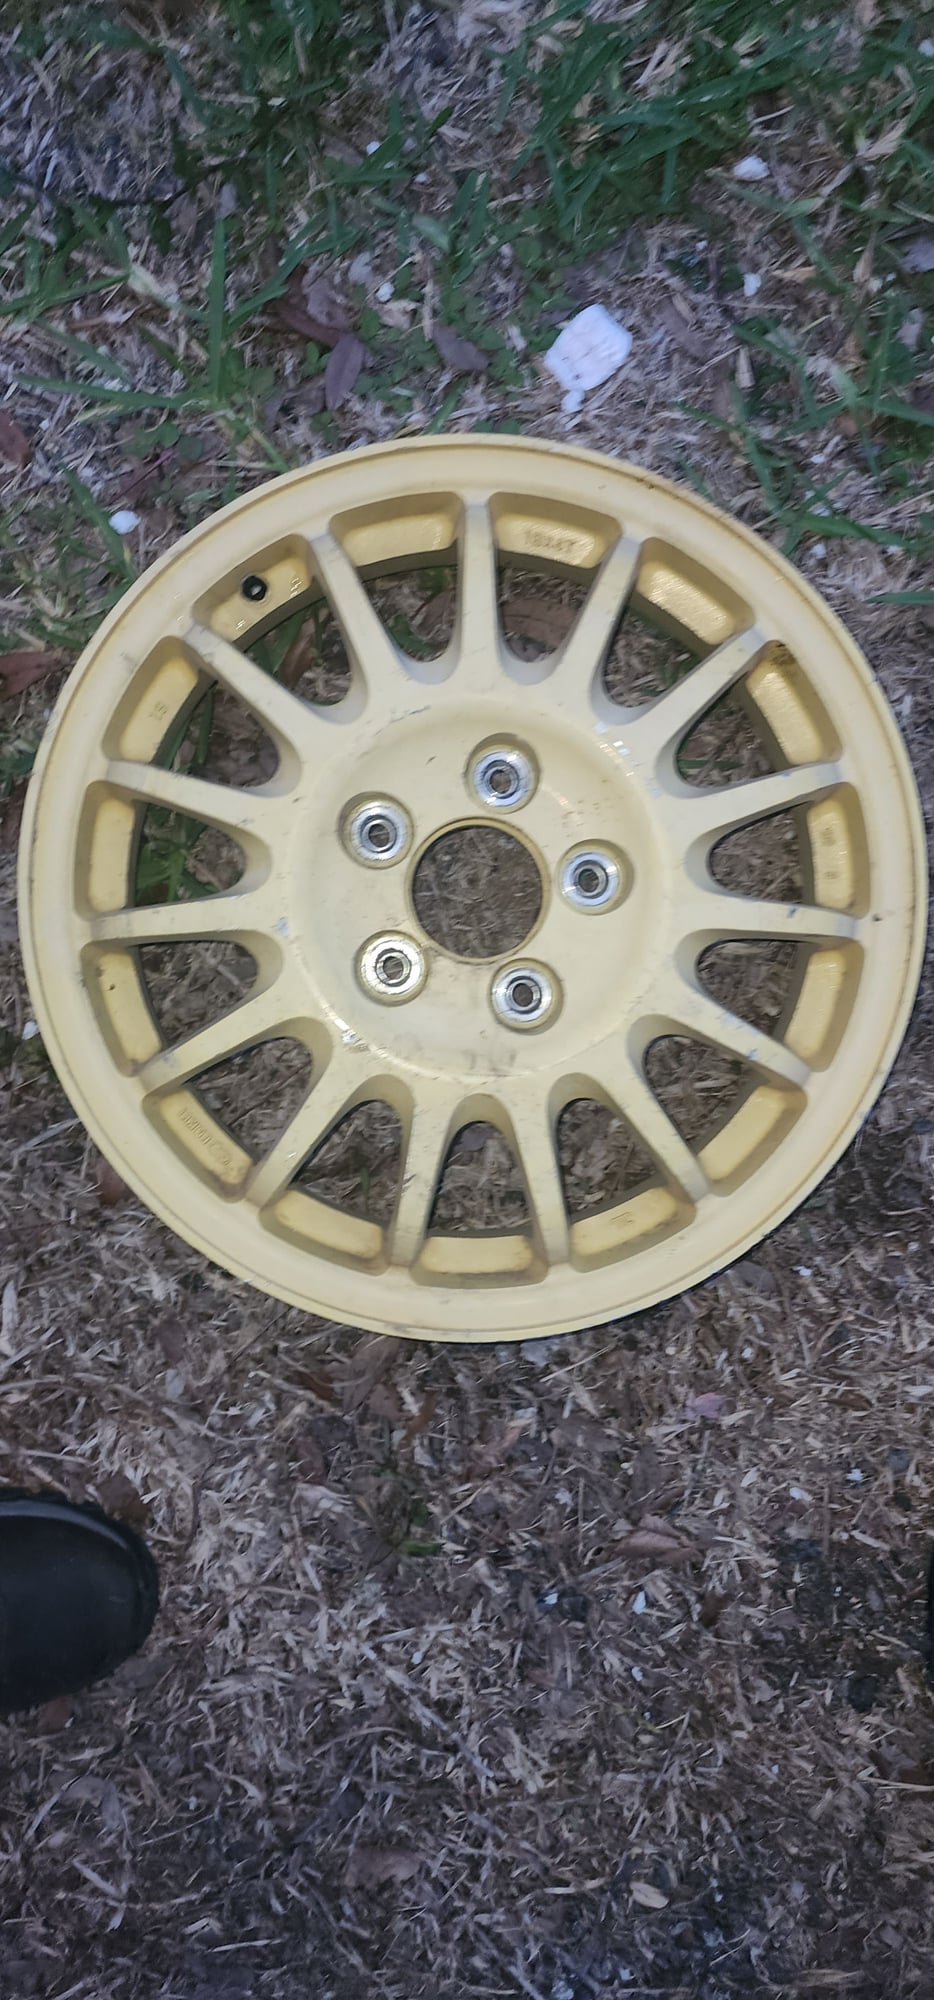 Wheels and Tires/Axles - OEM FD3S Wheels (Lightweight) Style and Spare Aluminum Wheel - Used - 1992 to 1995 Mazda RX-7 - Kissimmee, FL 34734, United States